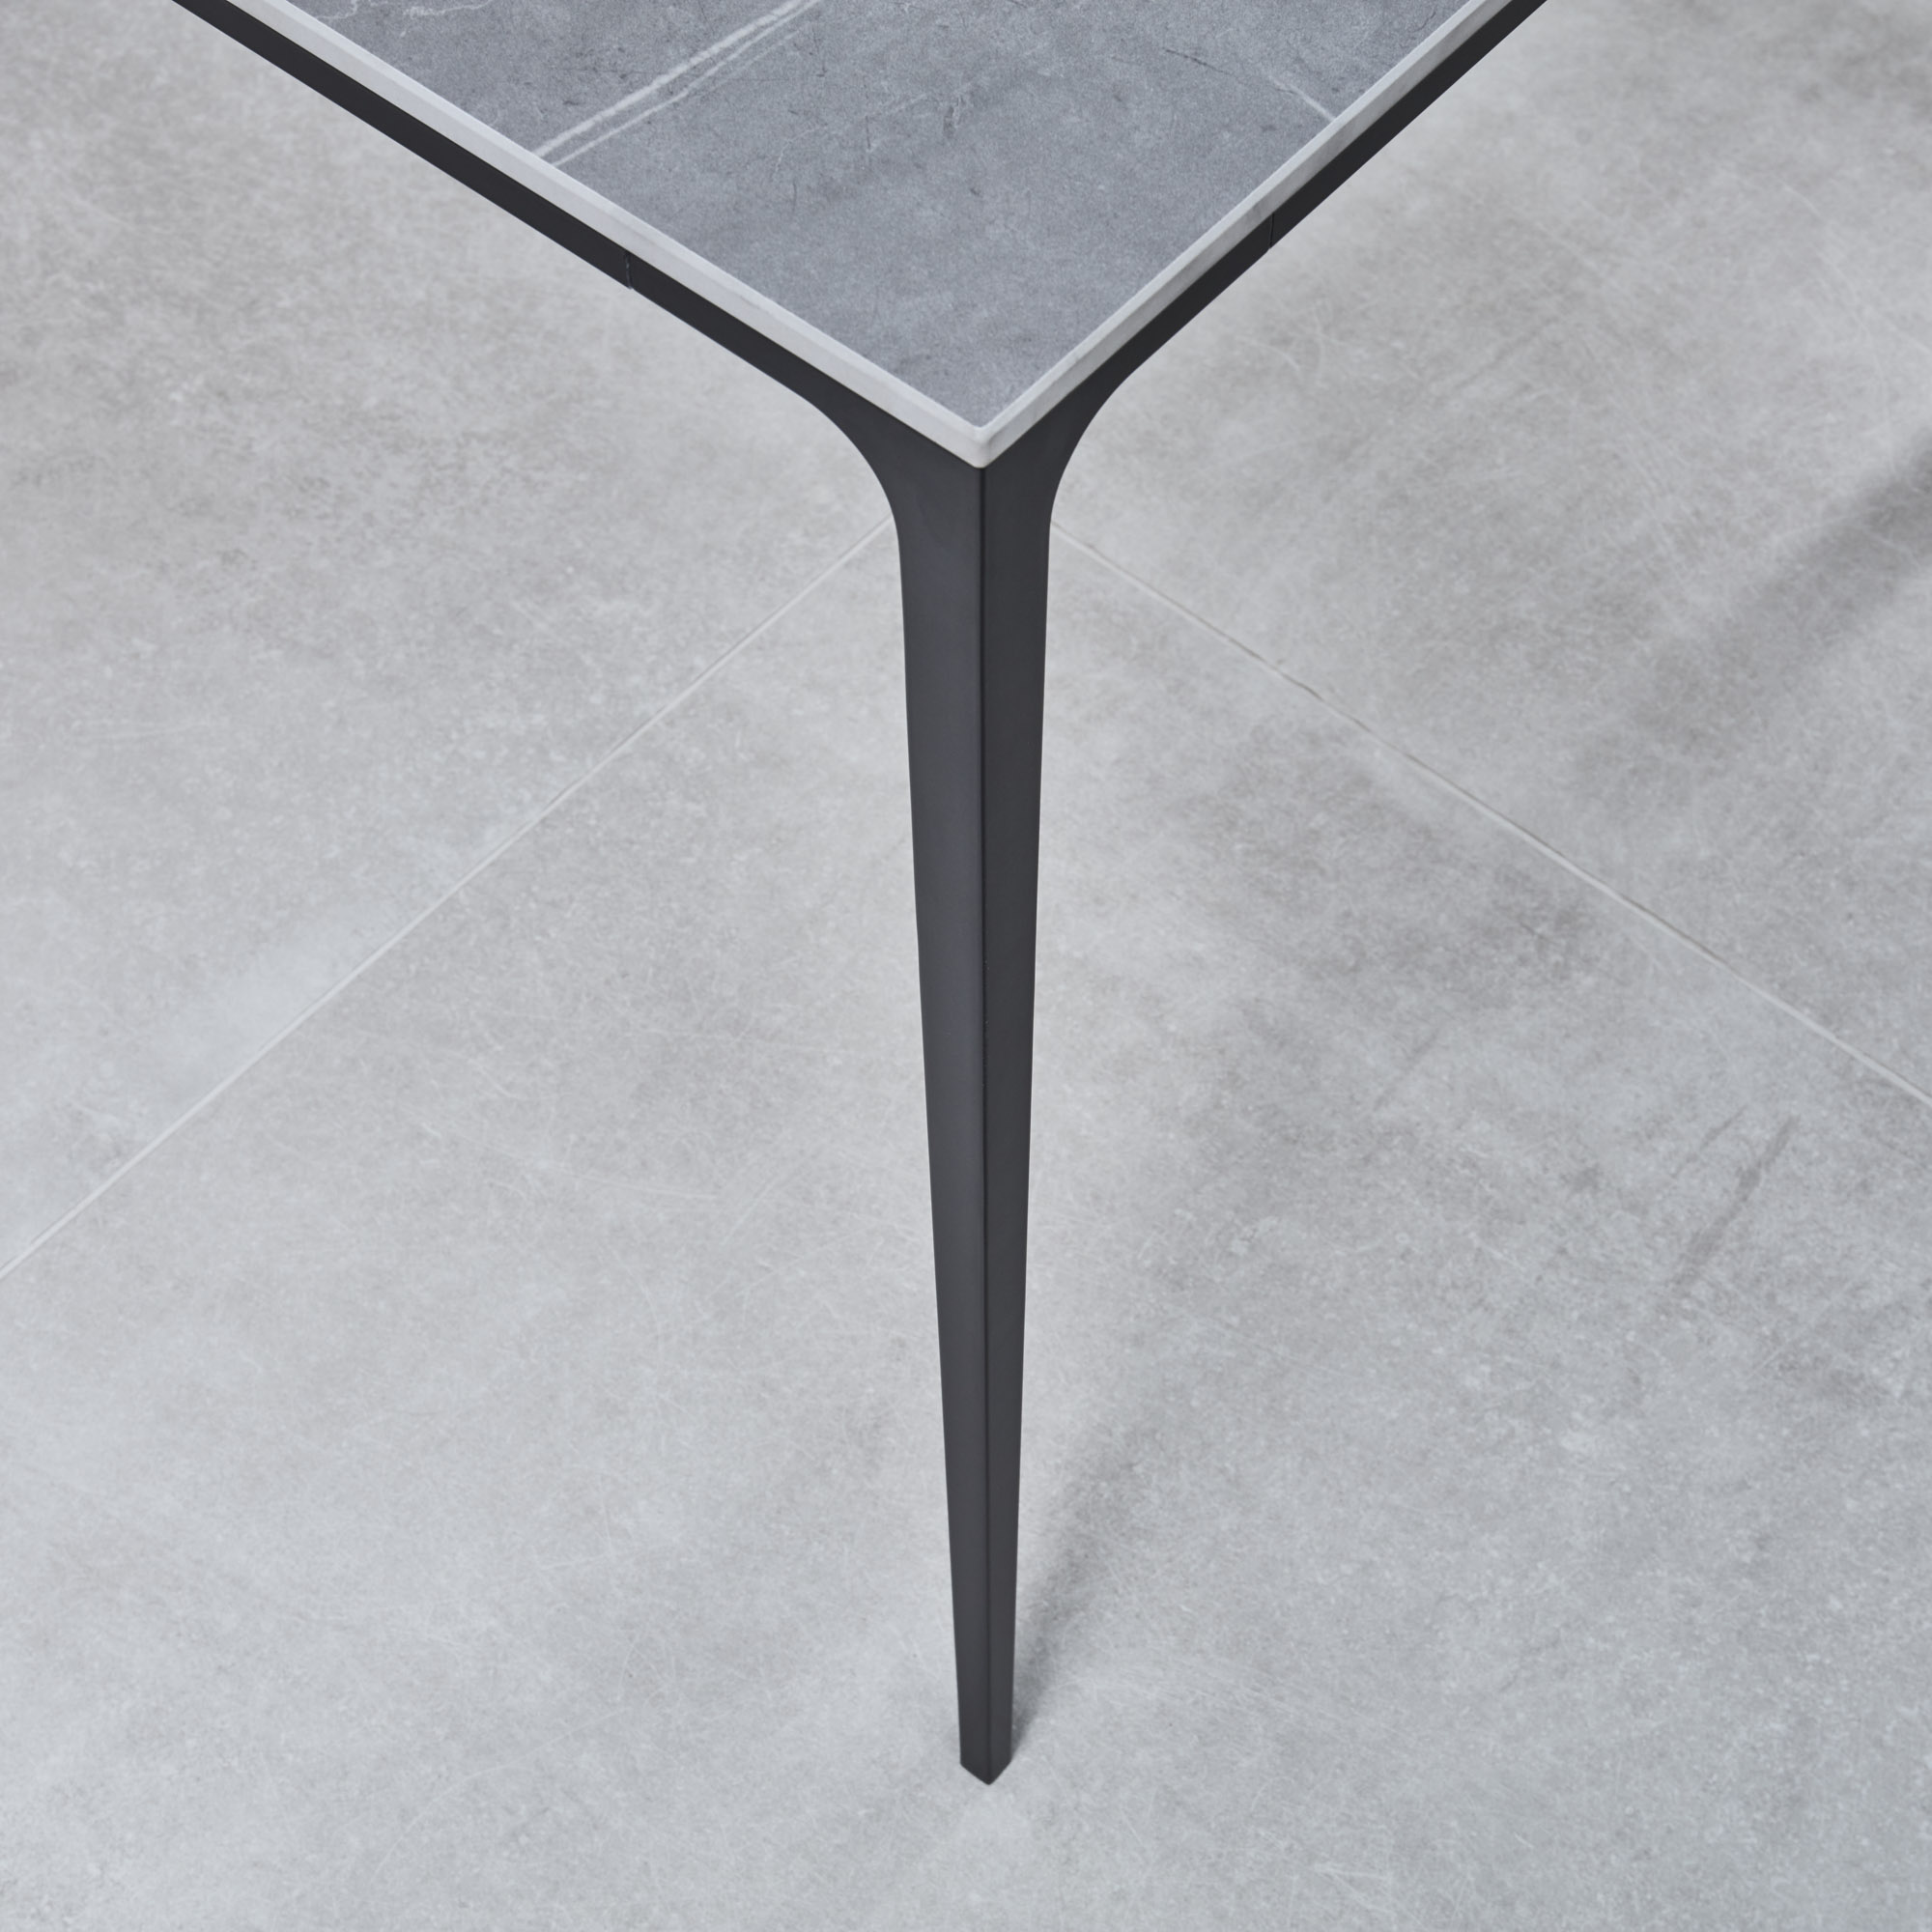 Bellagio 160cm Grey Sintered Stone Dining Table with Black Contemporary Base